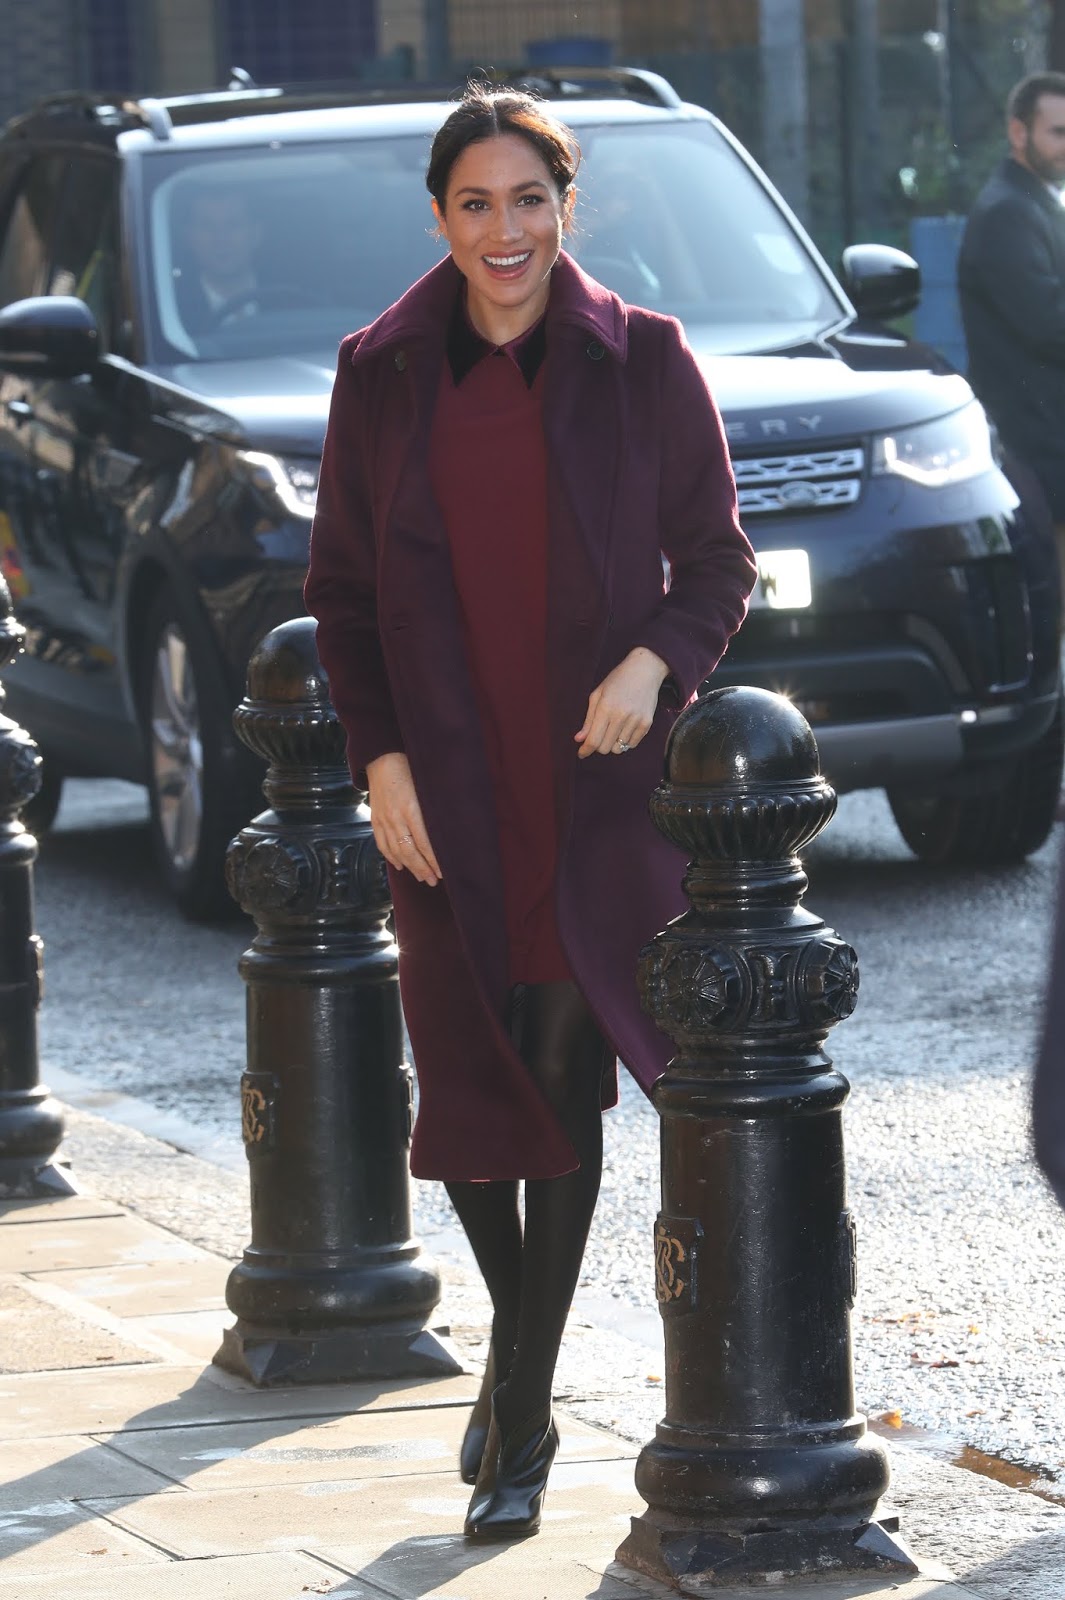 Celebrity Legs And Feet In Tights Meghan Markle`s Legs And Feet In Tights 3